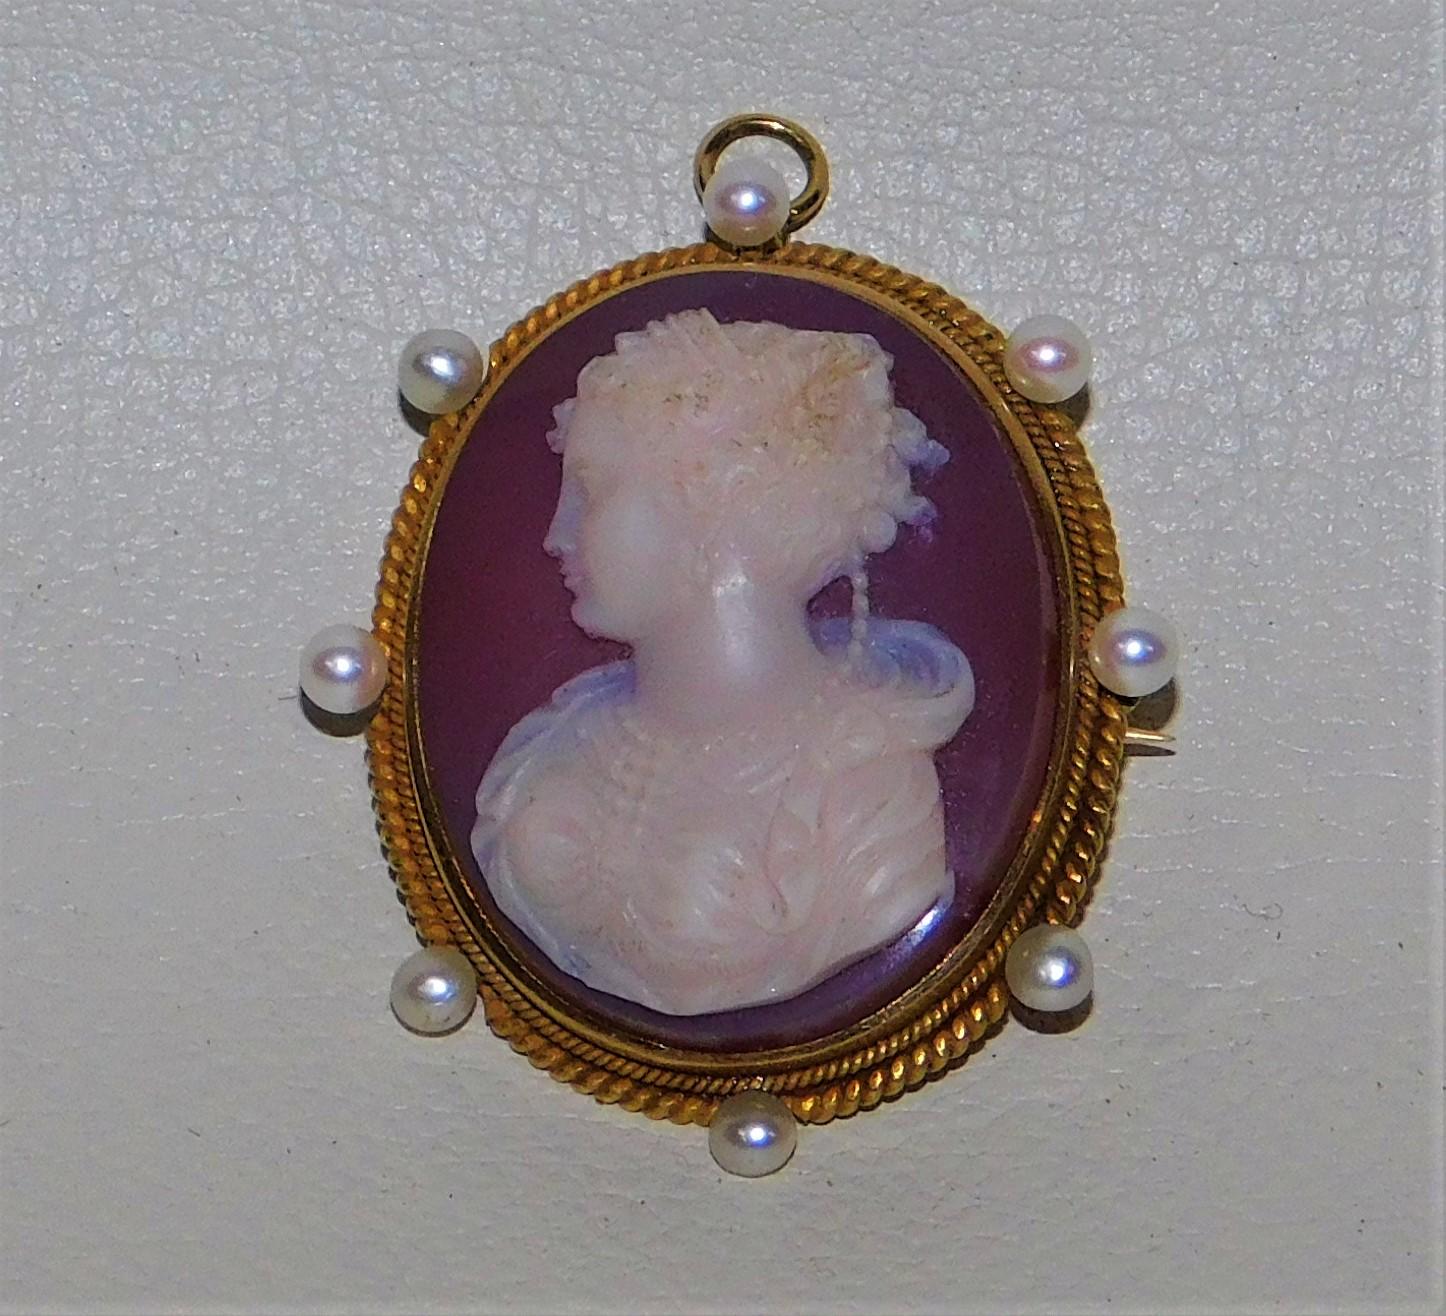 English Fine Victorian 14K Gold and Pearls Hand Carved Cameo Brooch/Necklace Pendant  